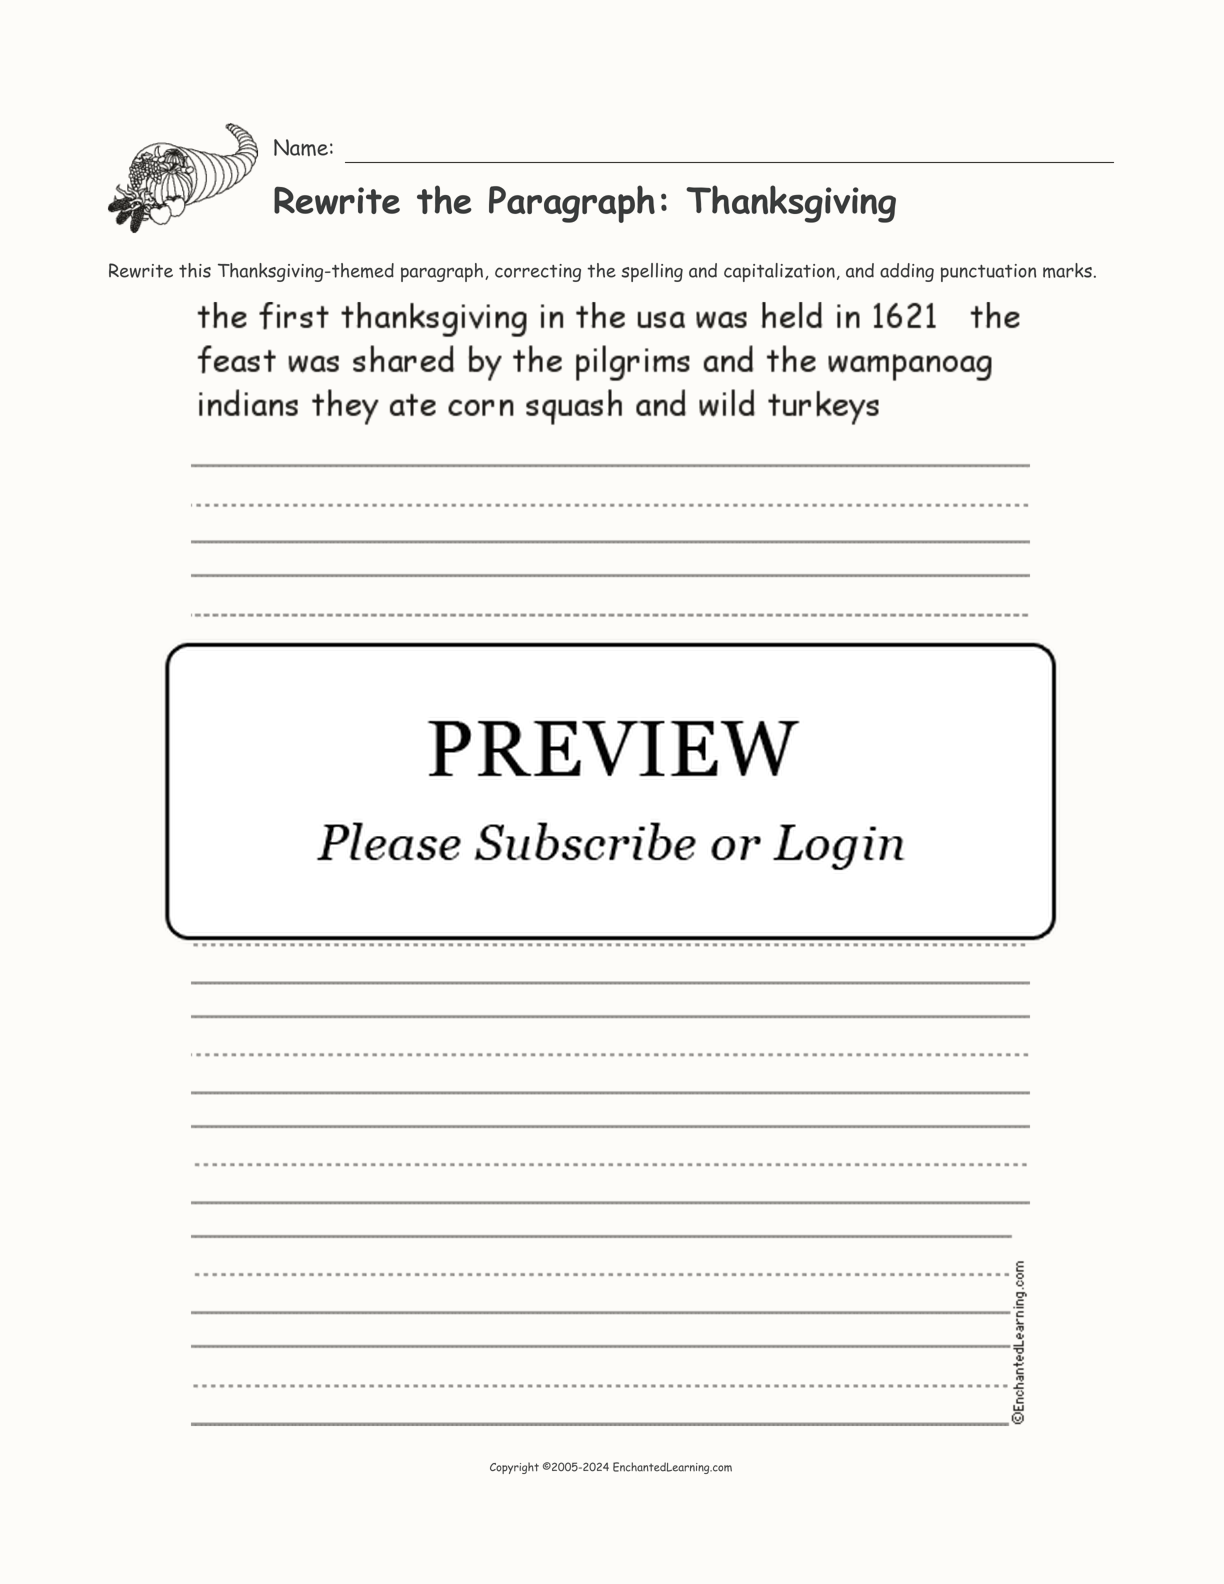 Rewrite the Paragraph: Thanksgiving interactive worksheet page 1